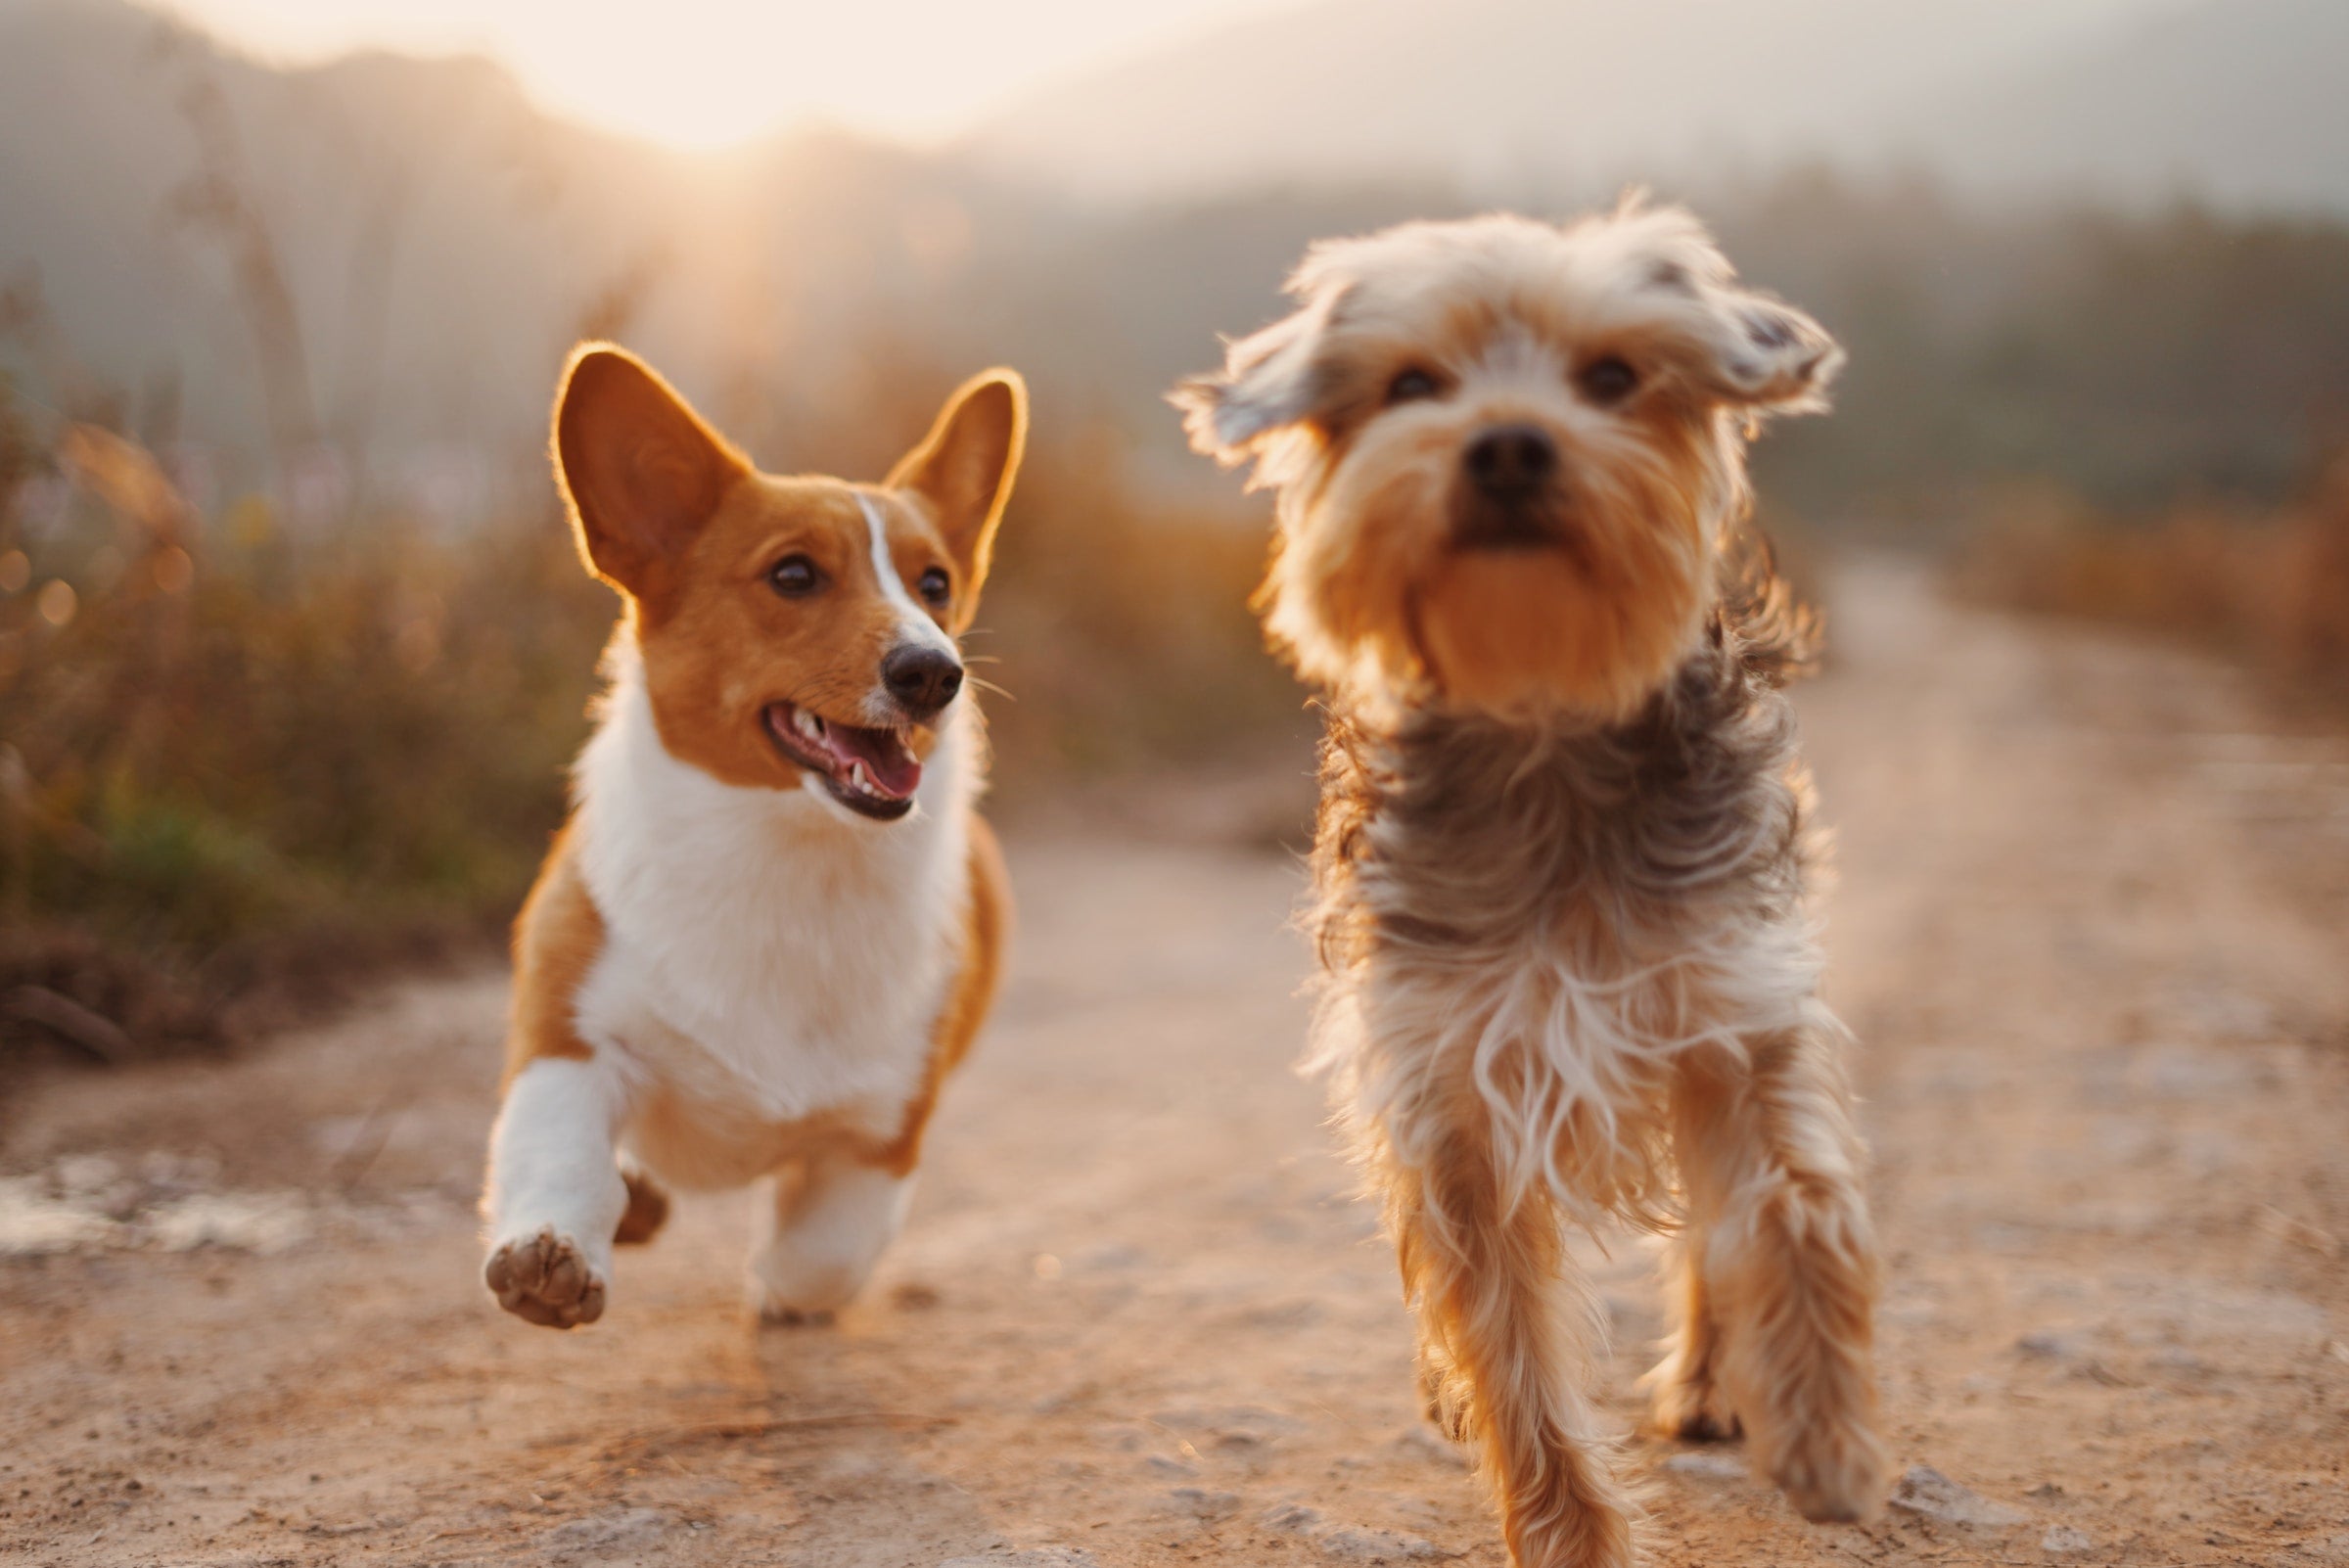 Two dogs running, they are healthy and happy thanks to getting quality pet supplements